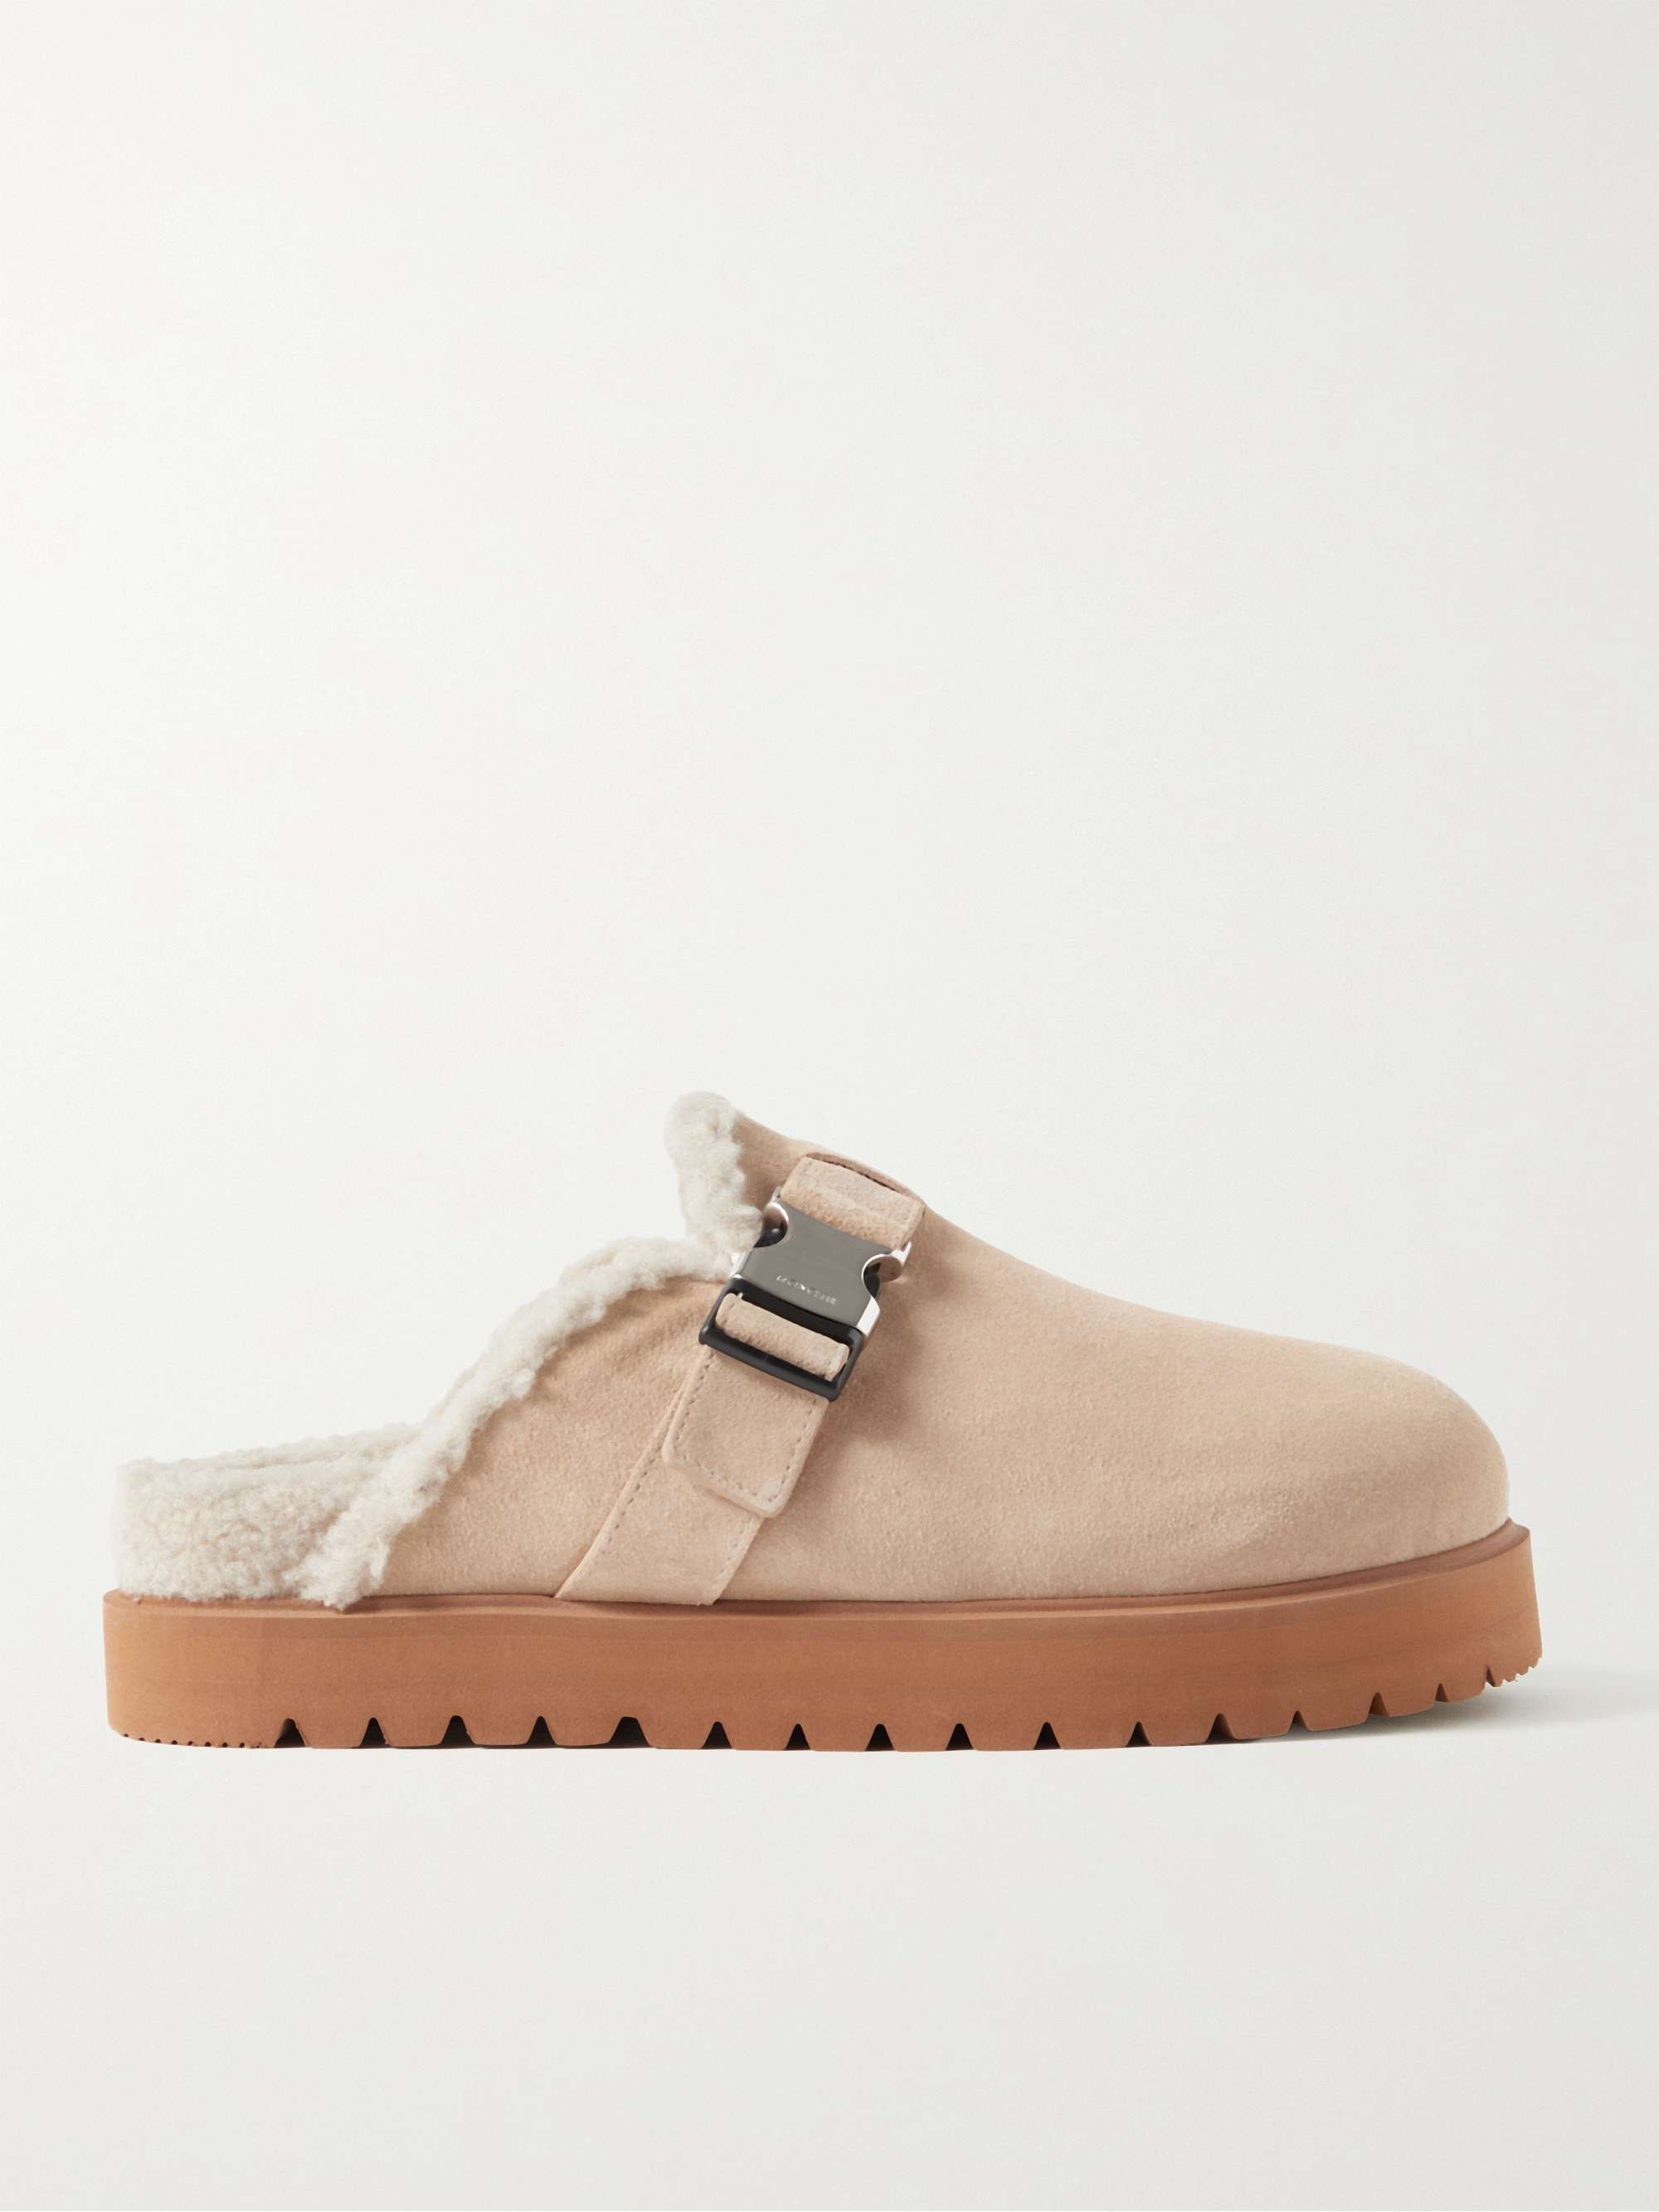 MONCLER Mon Faux Shearling-Lined Suede Clogs